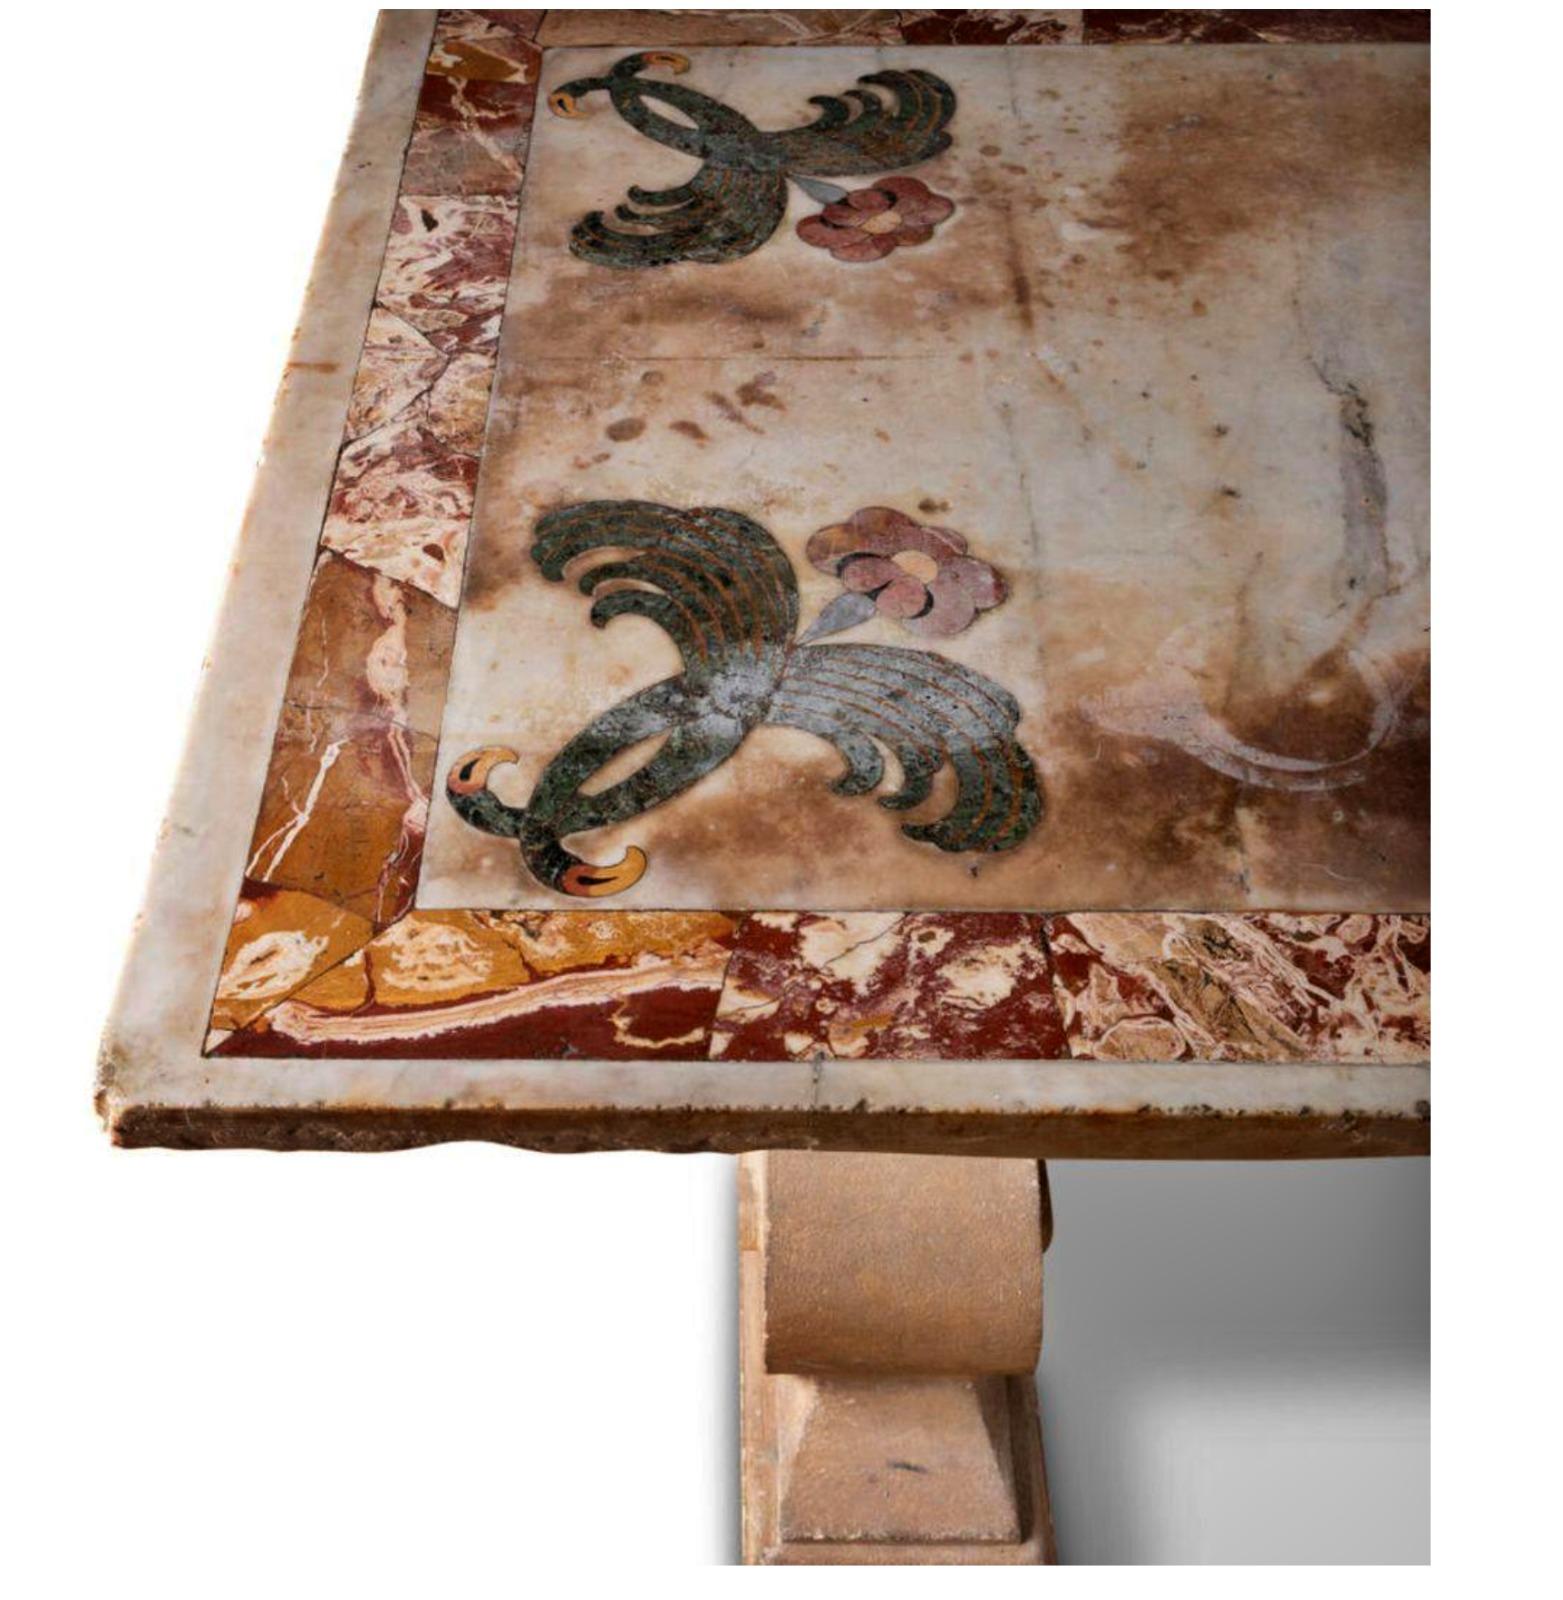 Important Italian Table 17th Century Marble Marquetry
Italy
Large TABLE with a top with floral scrolls on the spandrels, centered with a stylized floral motif Marble marquetry top, rear base with winding motifs 
H. 72 cm - W. 193 cm - D. 89.5 cm